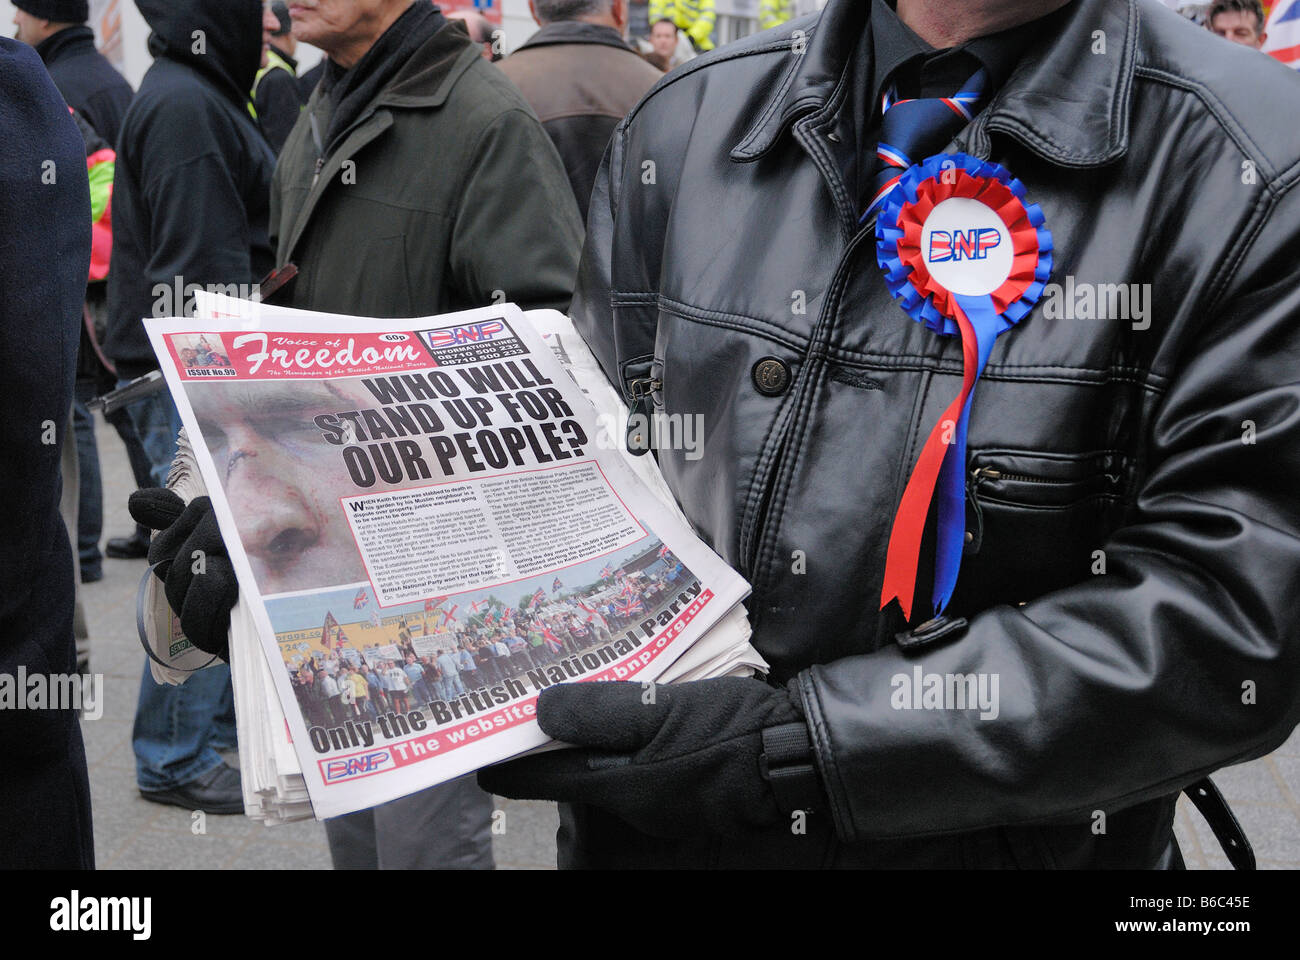 British National Party member handing out their 'Voice of Freedom' newspaper in Liverpool 29th. November 2008 Stock Photo